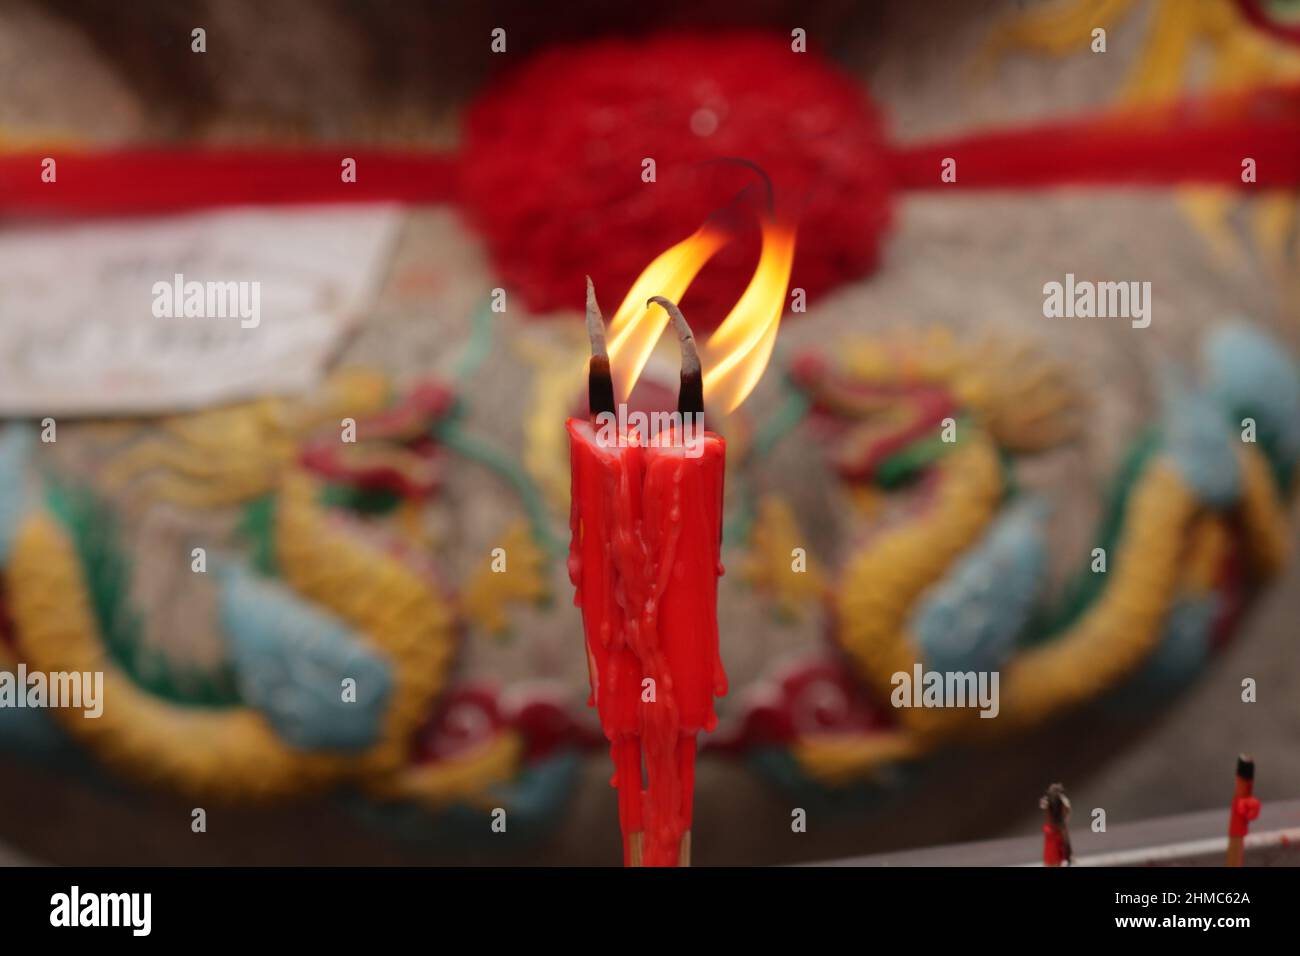 Two  candles burn  as offerings in a Temple, Chinatown, Bangkok,Thailand Stock Photo